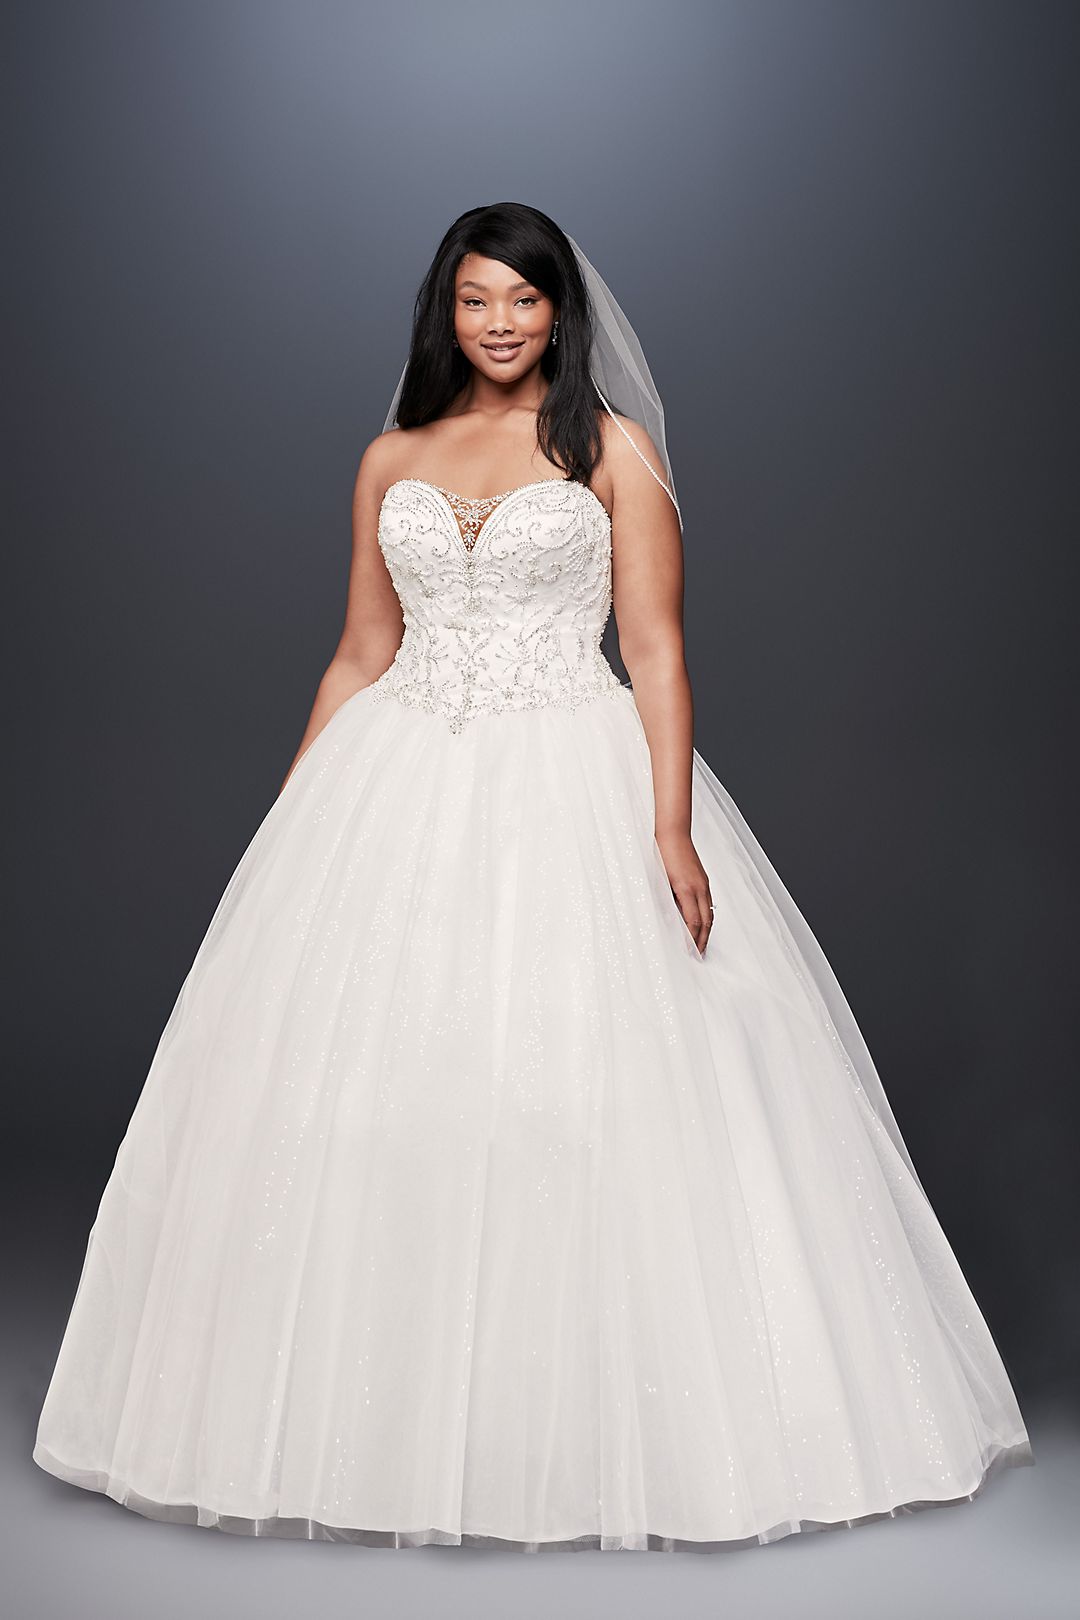 Assume Expensive bucket As-Is Illusion Plus Size Ball Gown Wedding | David's Bridal